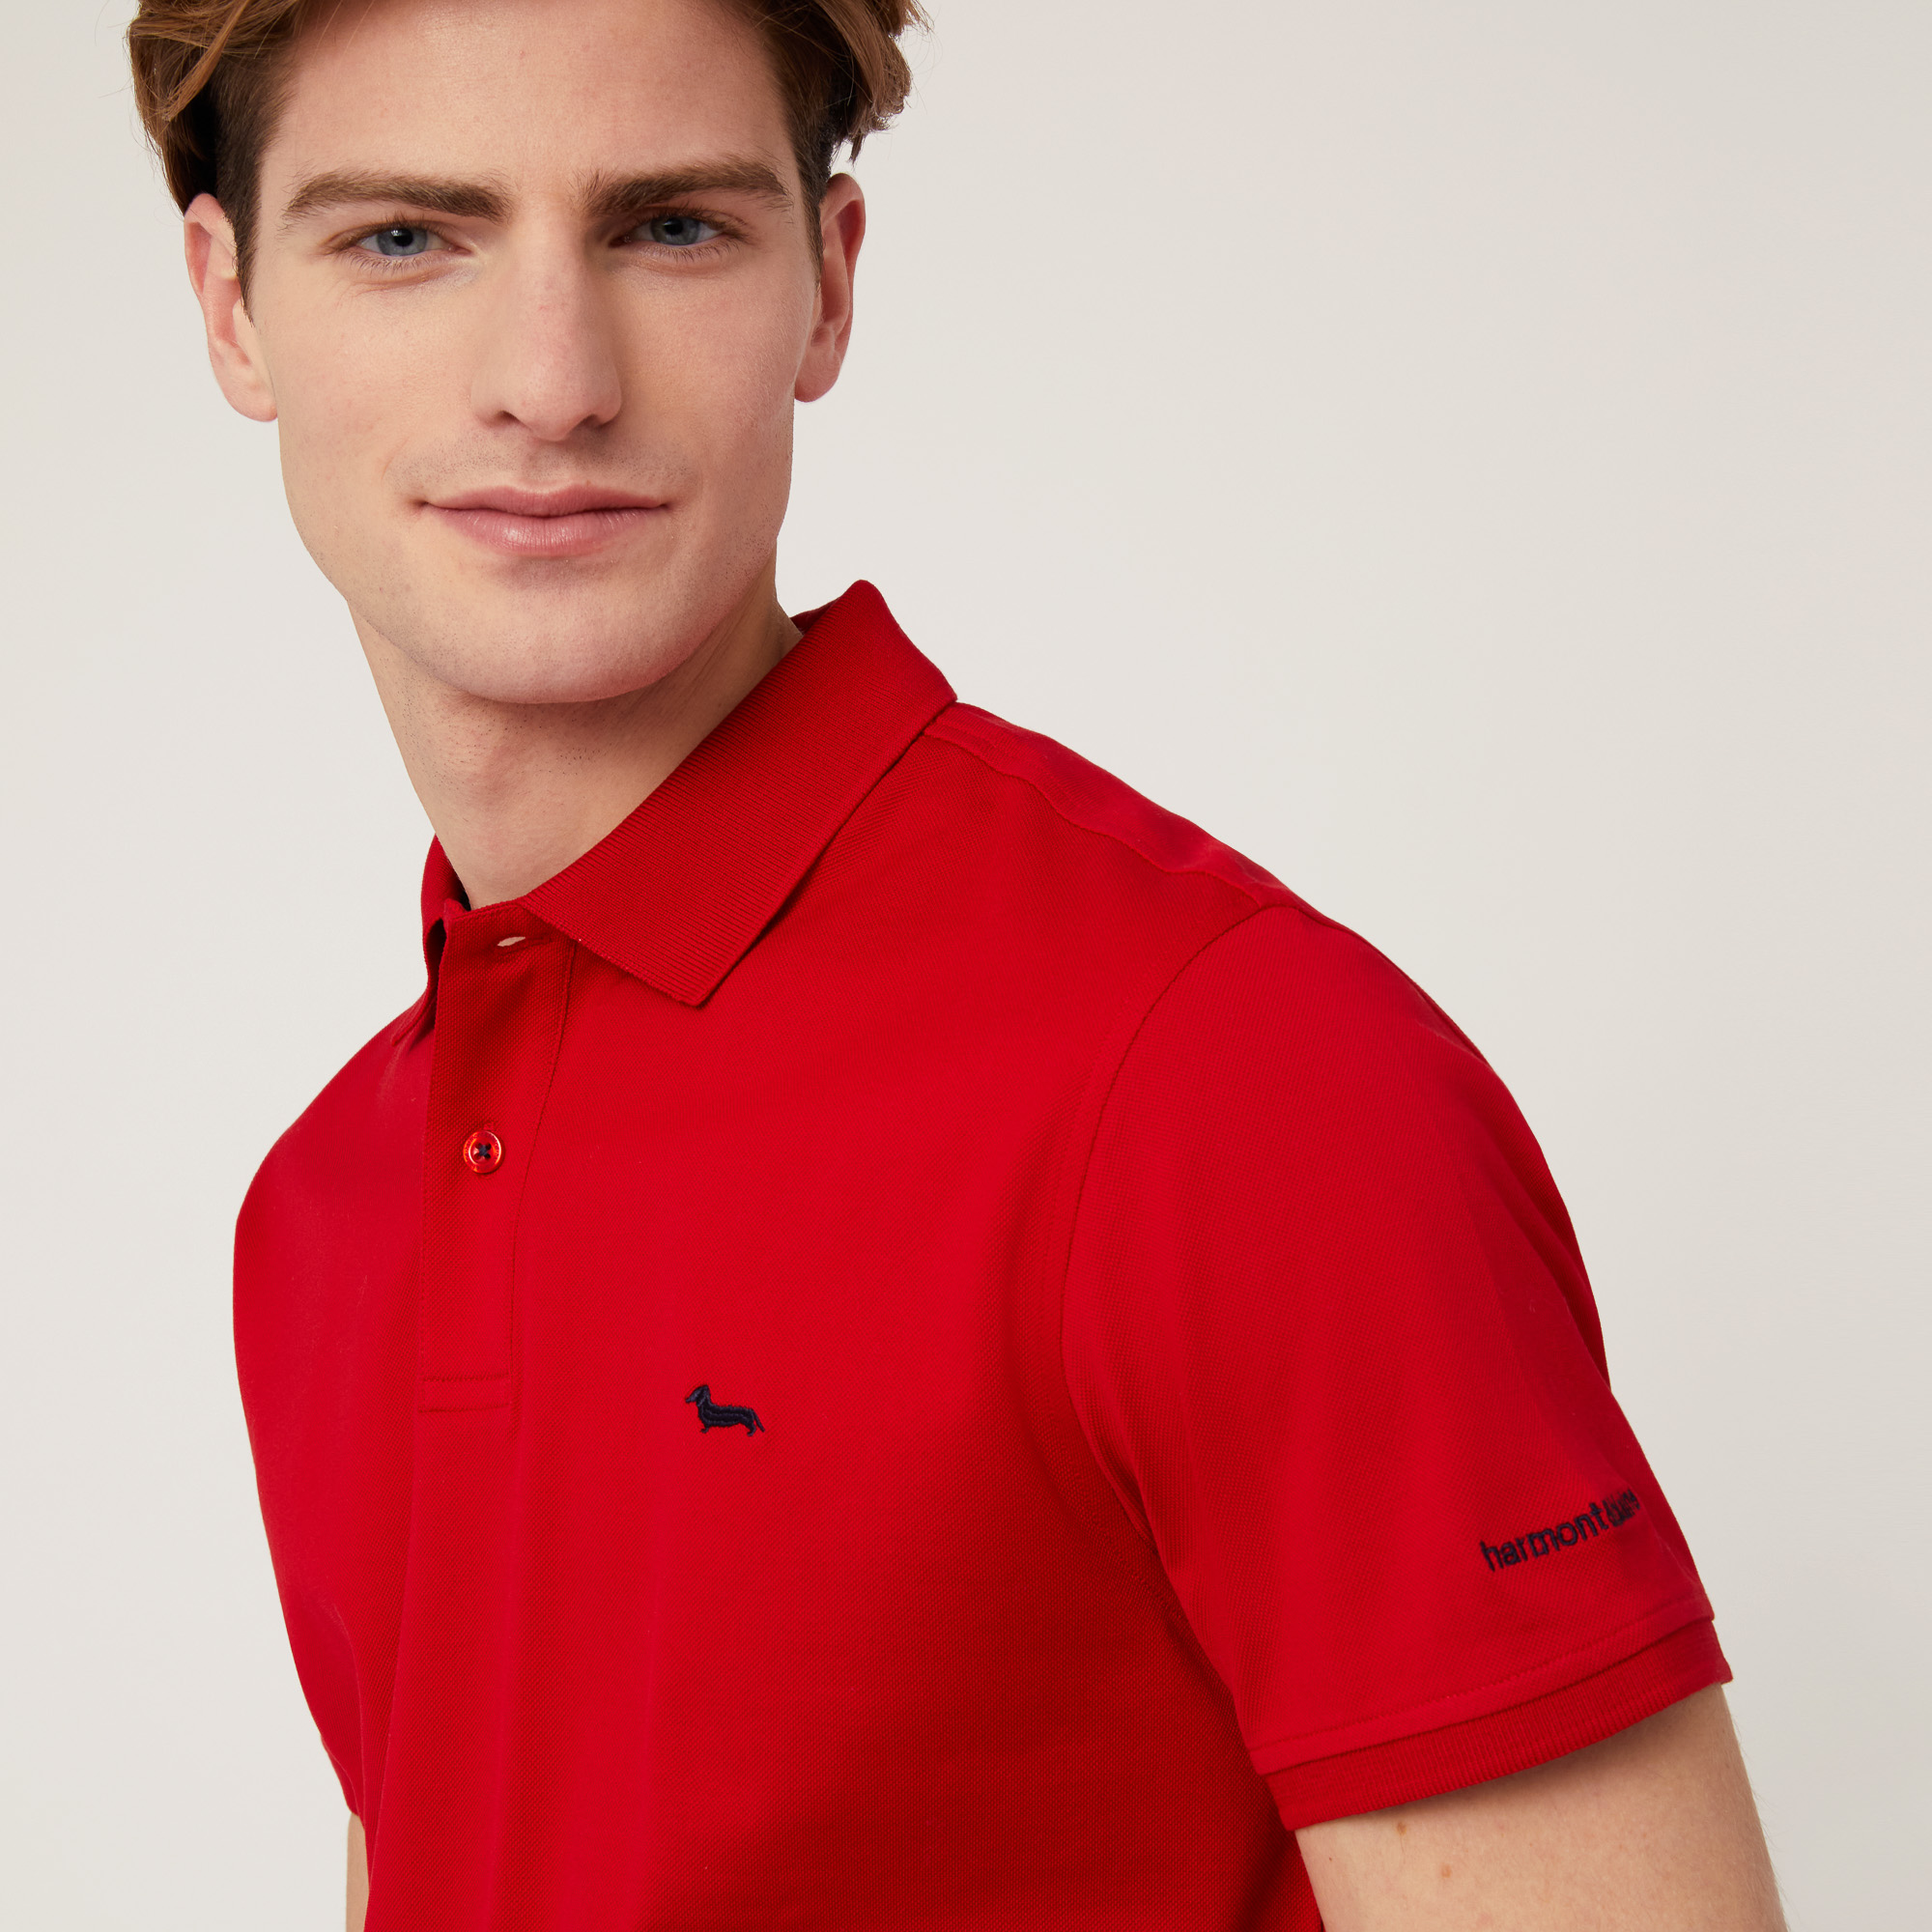 Poloshirt mit Lettering und Logo, Rot, large image number 2